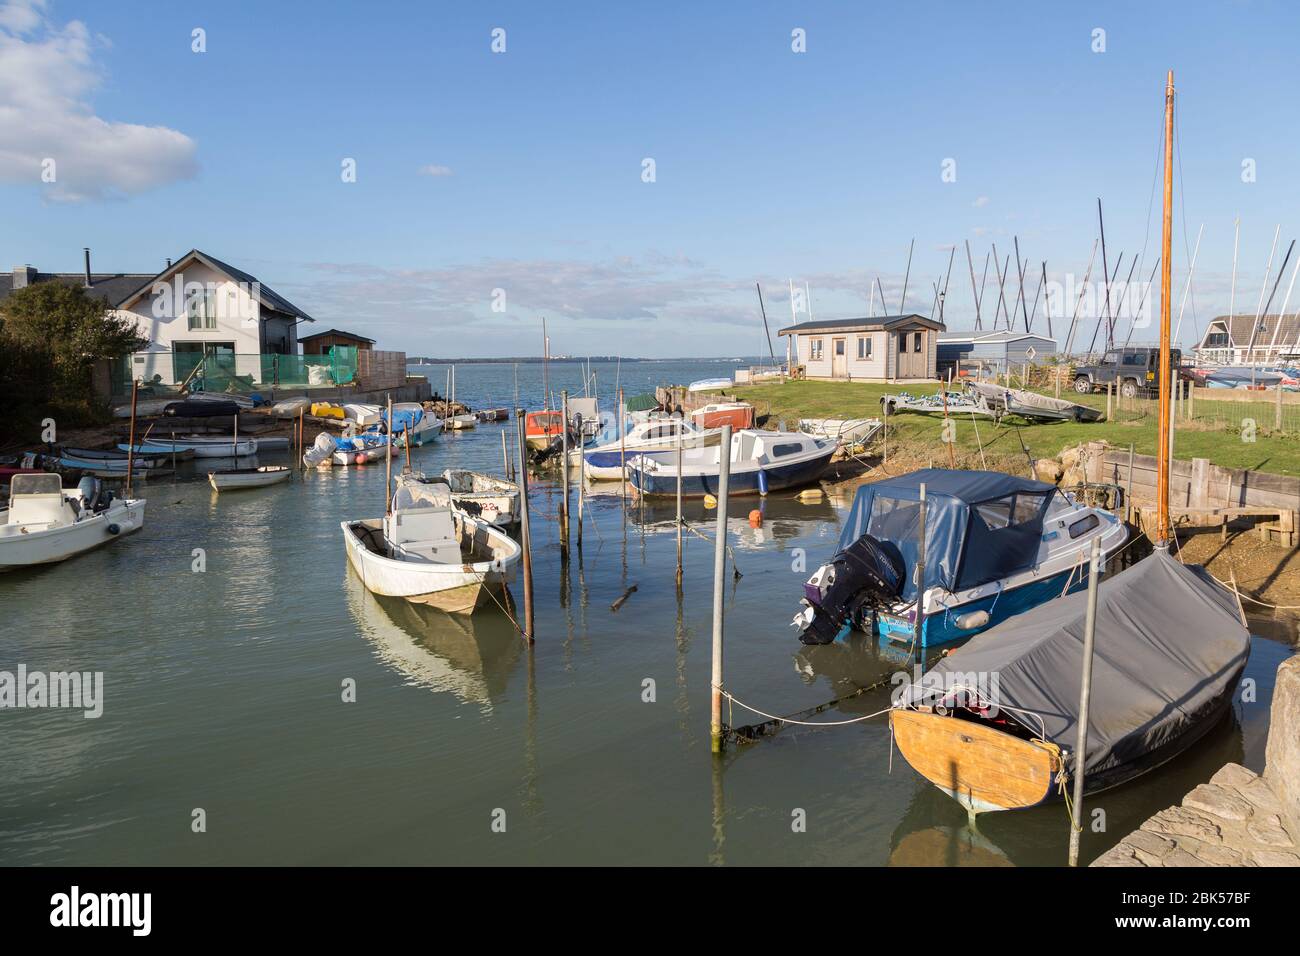 Boats moored in inlet, Gurnard, Isle of Wight, UK Stock Photo